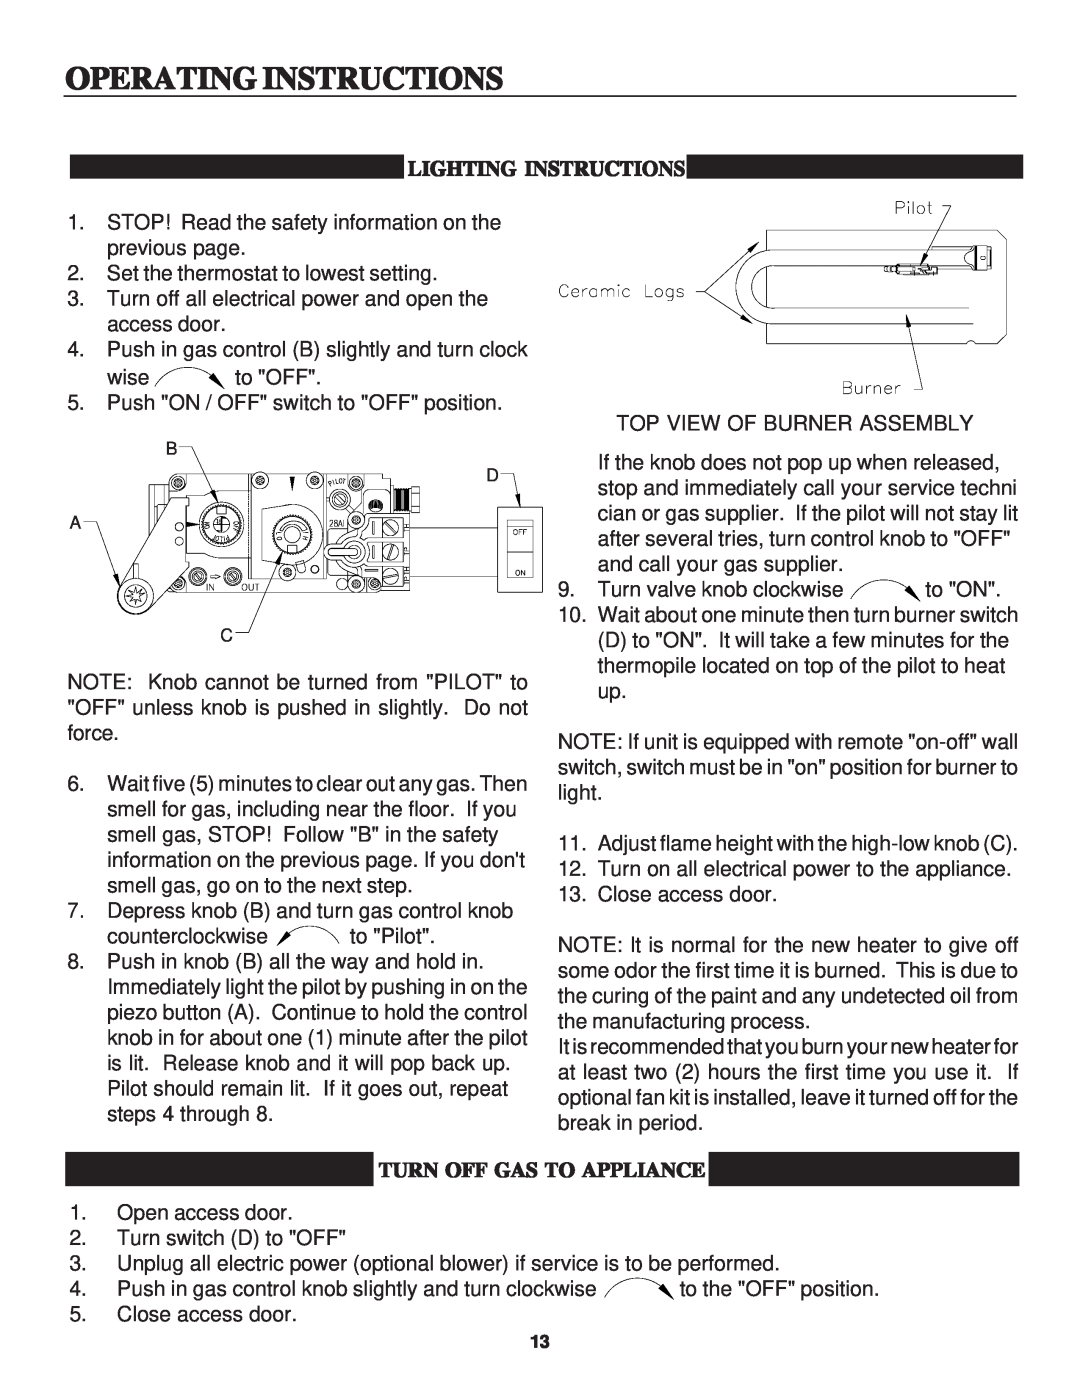 United States Stove B2045N, B2045L manual Operating Instructions, Lighting Instructions, Turn Off Gas To Appliance 